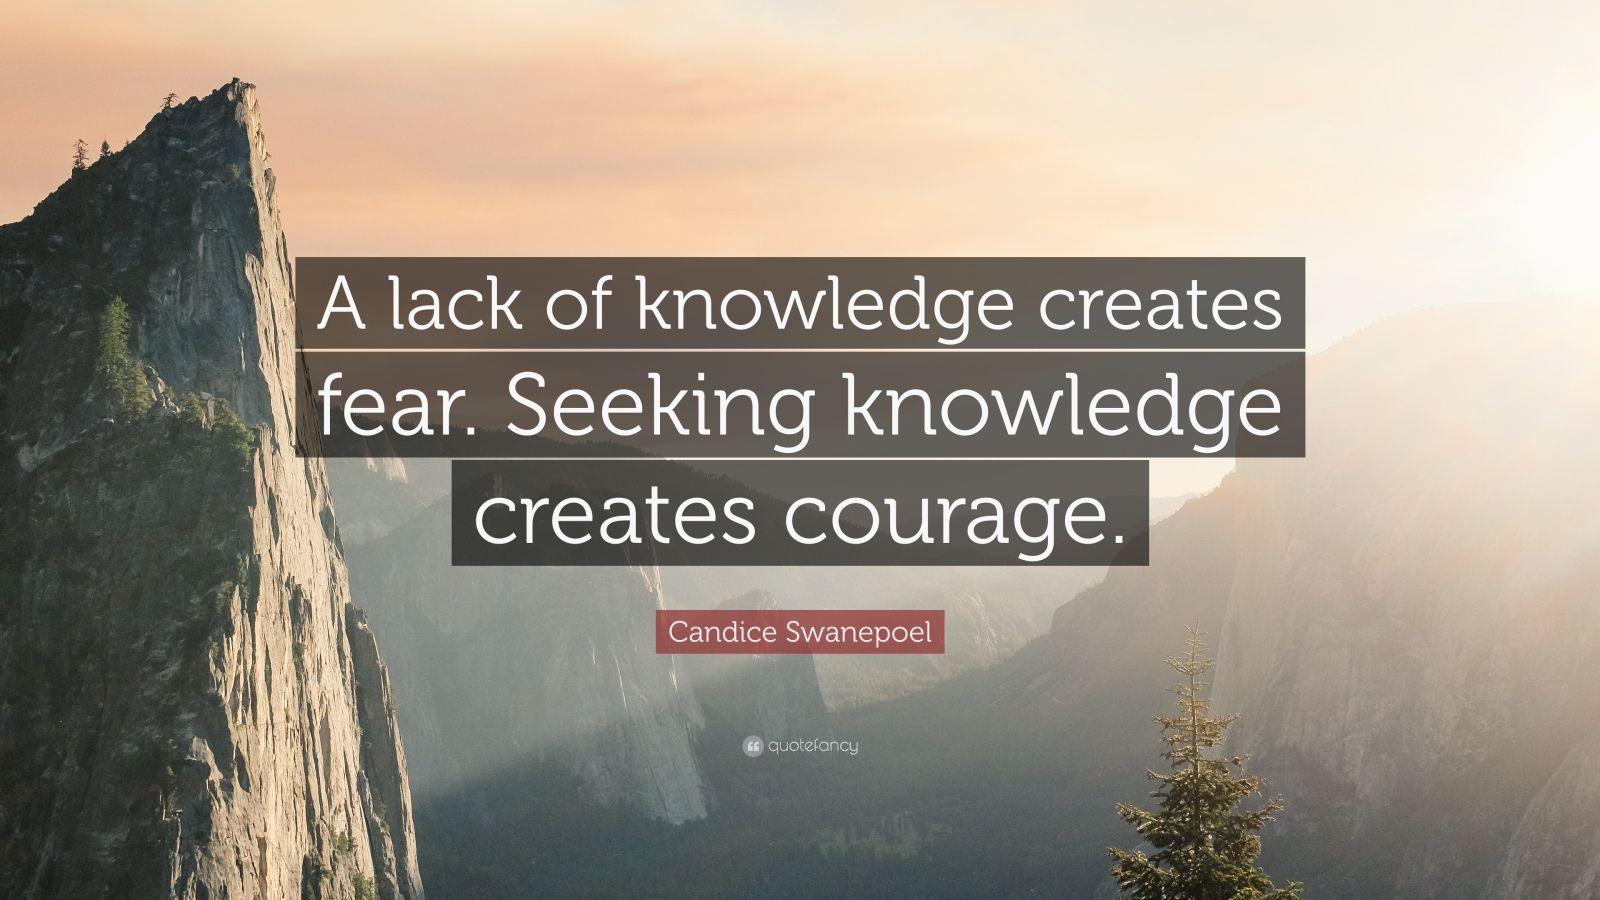 Candice Swanepoel Quote: “A lack of knowledge creates fear. Seeking